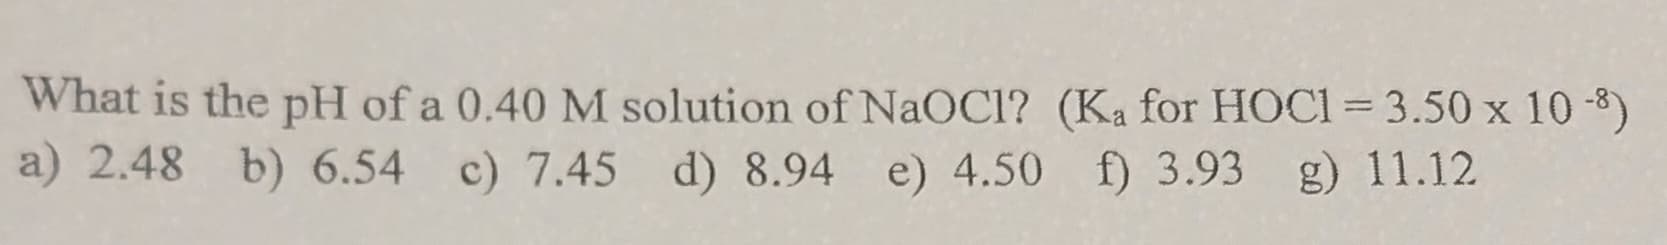 What is the pH of a 0.40 M solution of NaOCI? (Ka for HOC1 = 3.50 x 10 -8)
a) 2.48 b) 6.54 c) 7.45 d) 8.94 e) 4.50 f) 3.93 g) 11.12